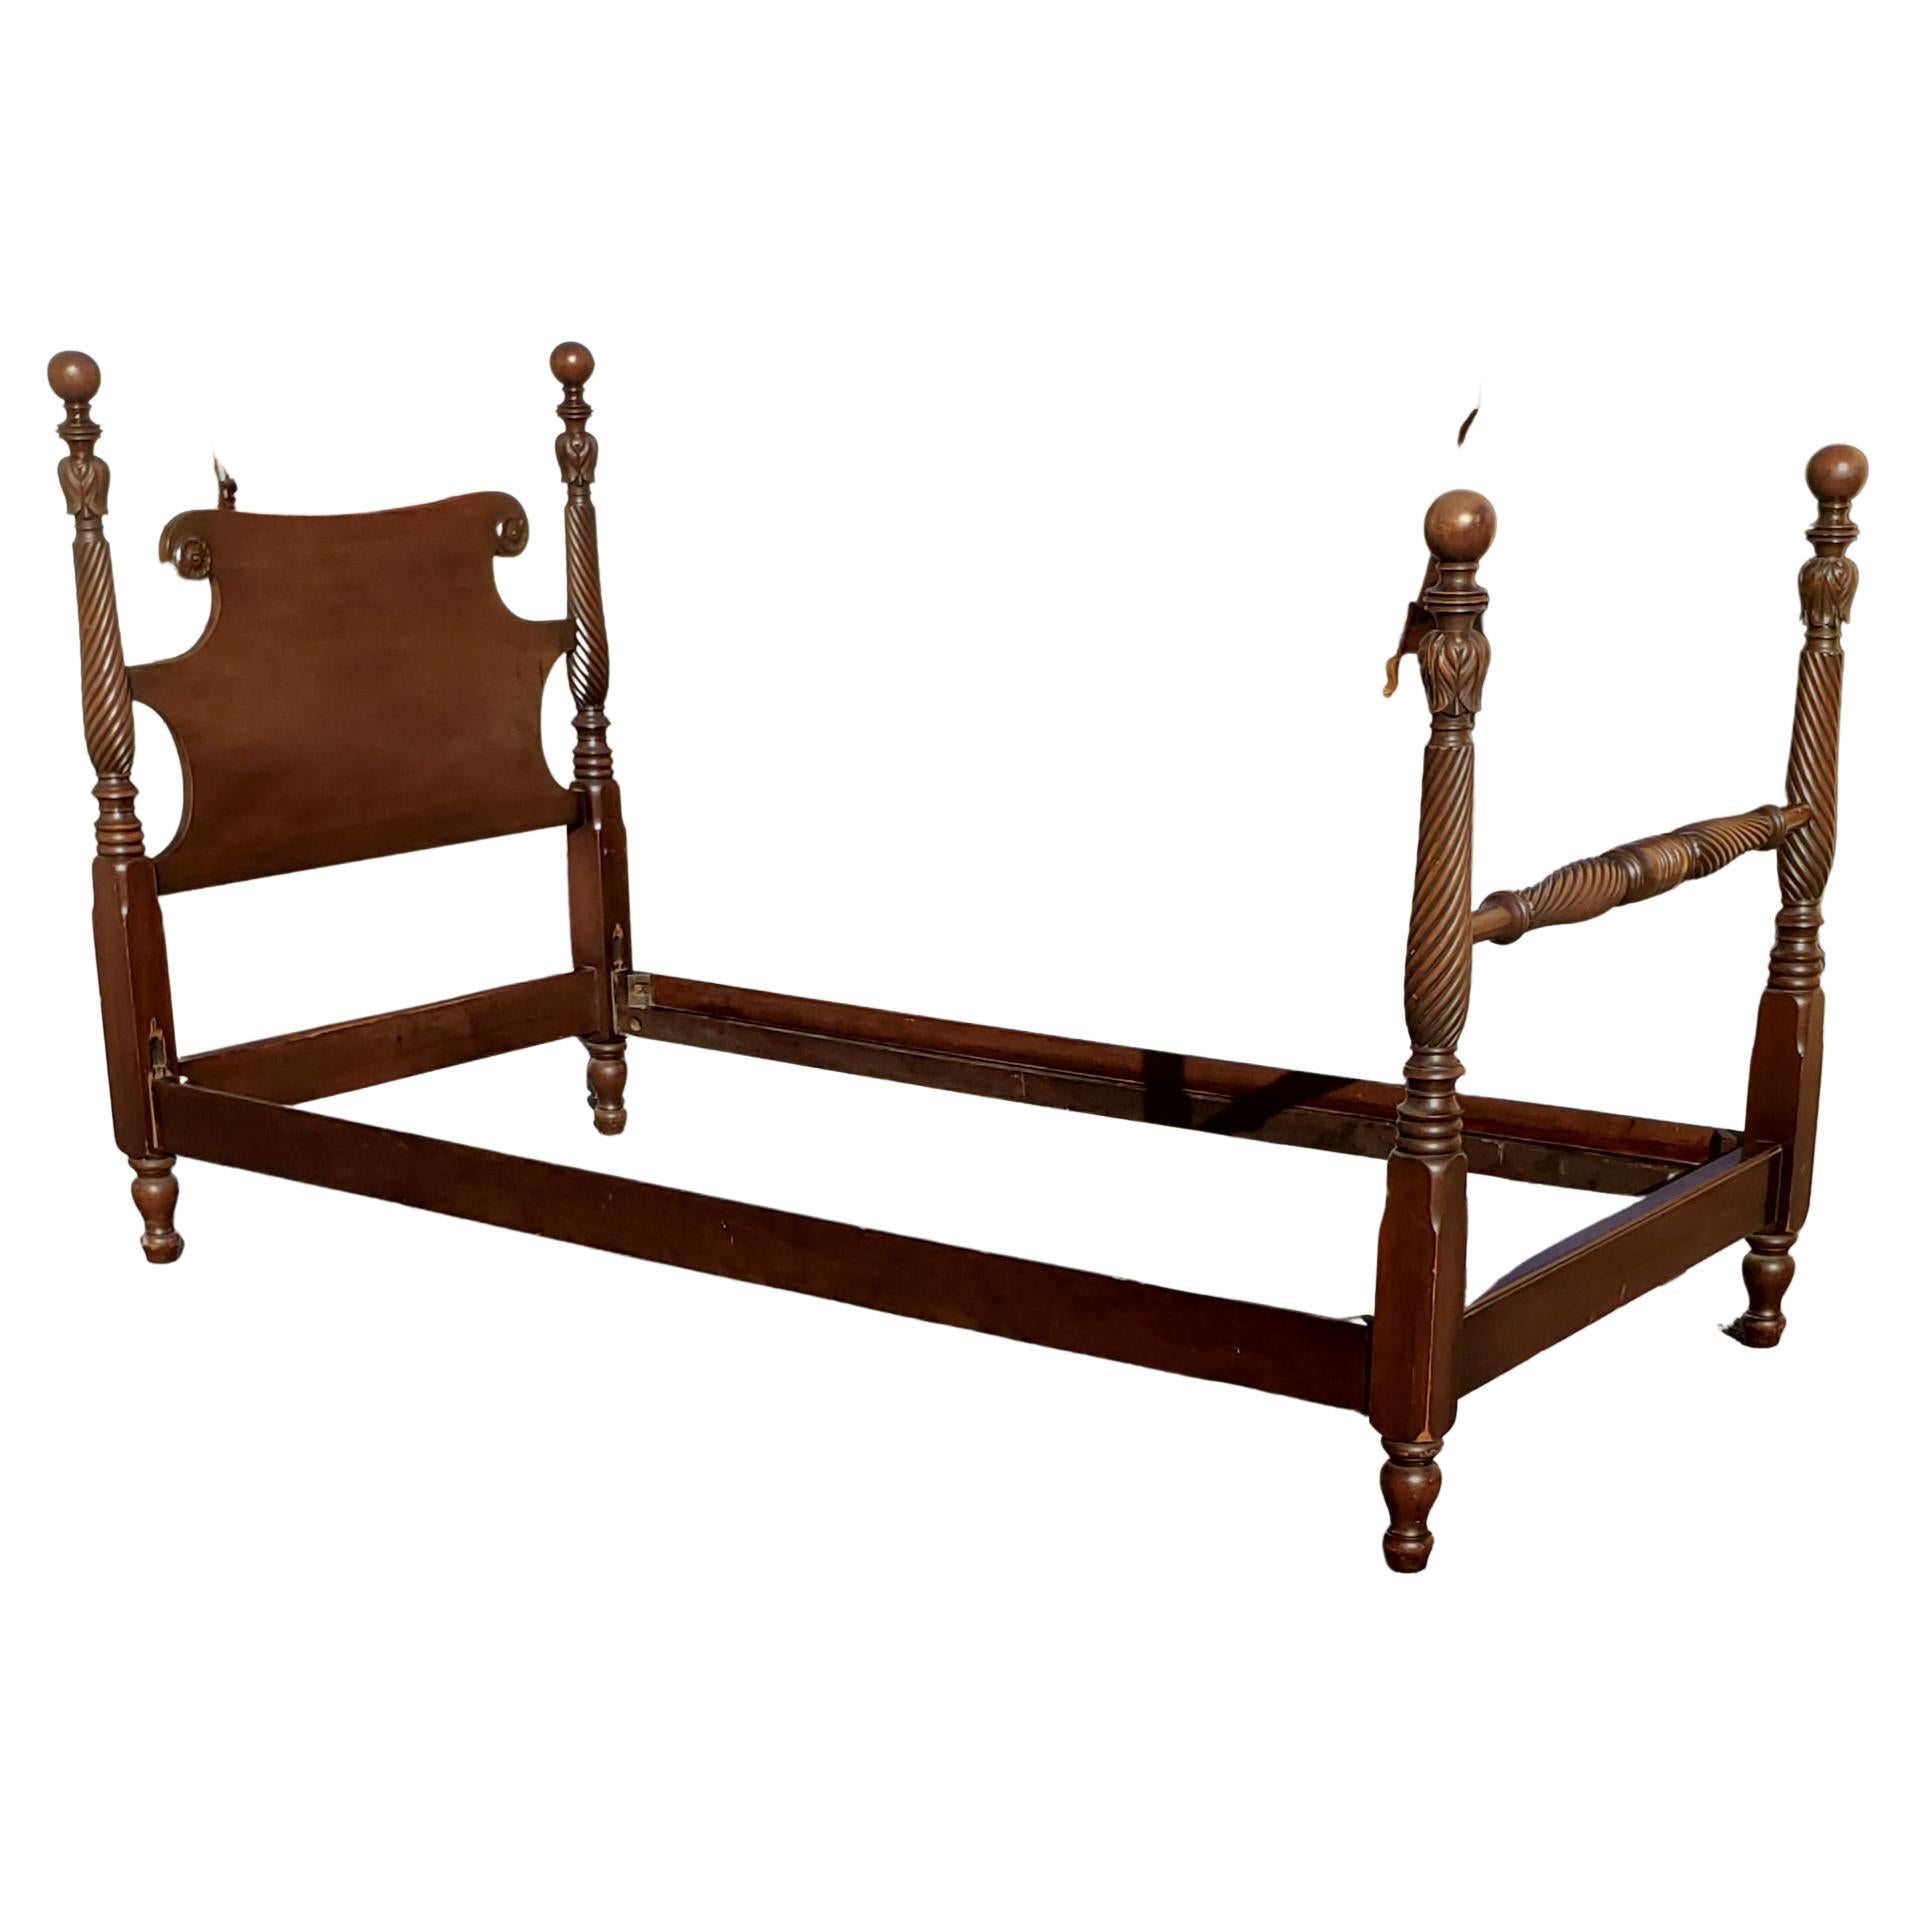 Exceptional pair of Kindel Oxford mahogany semi-post twin bedframe in good vintage condition. Circa 1930s.
Measure 40